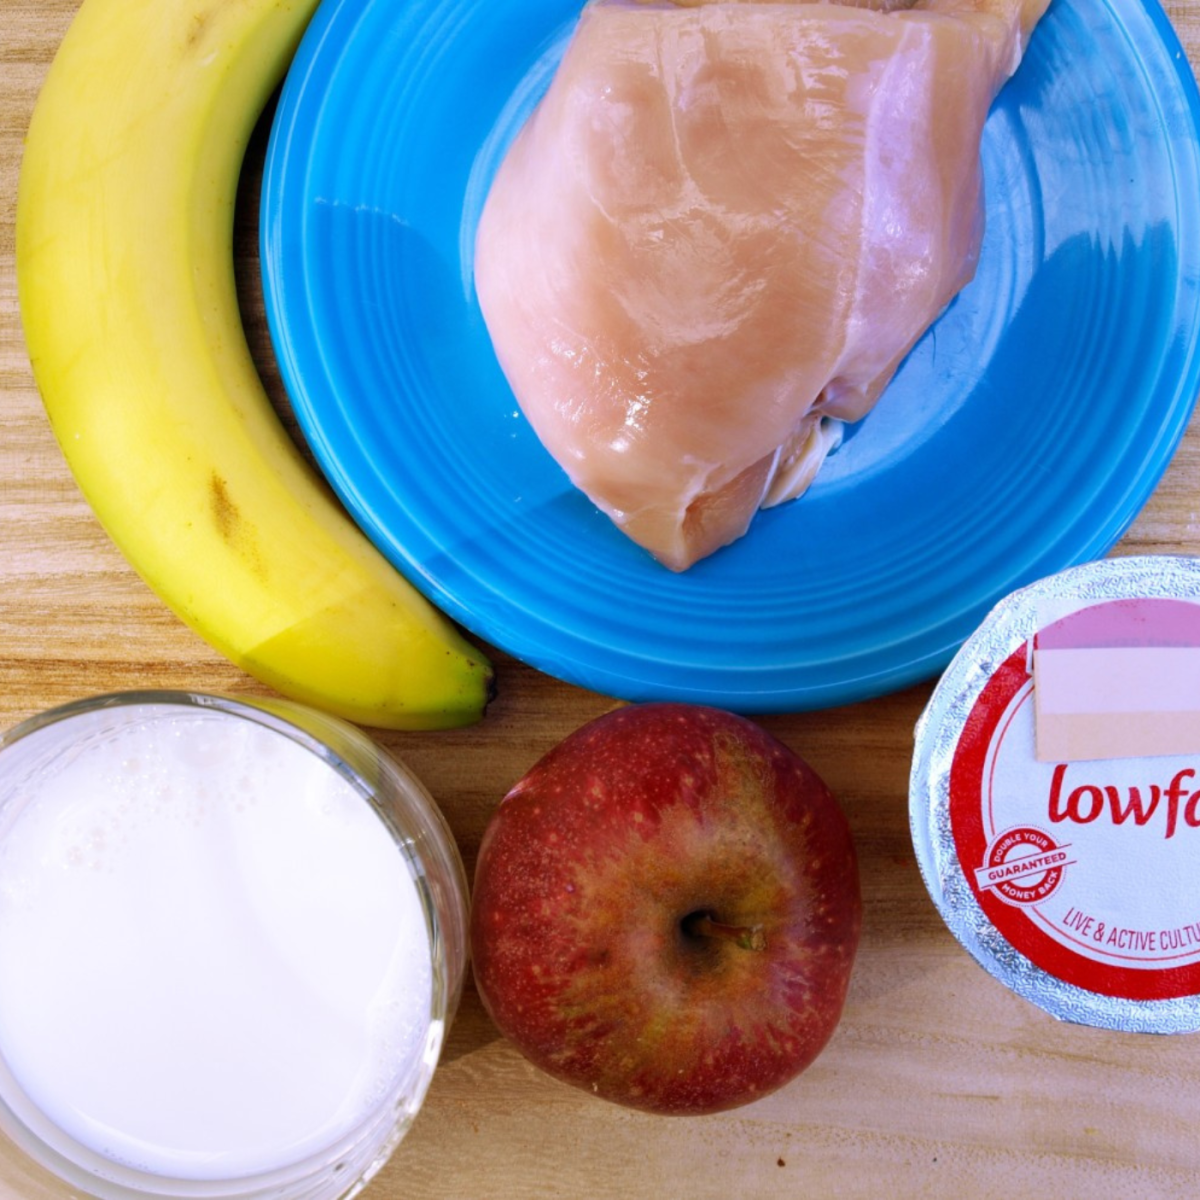 Low-fat foods are recommended to relieve acid reflux symptoms. 